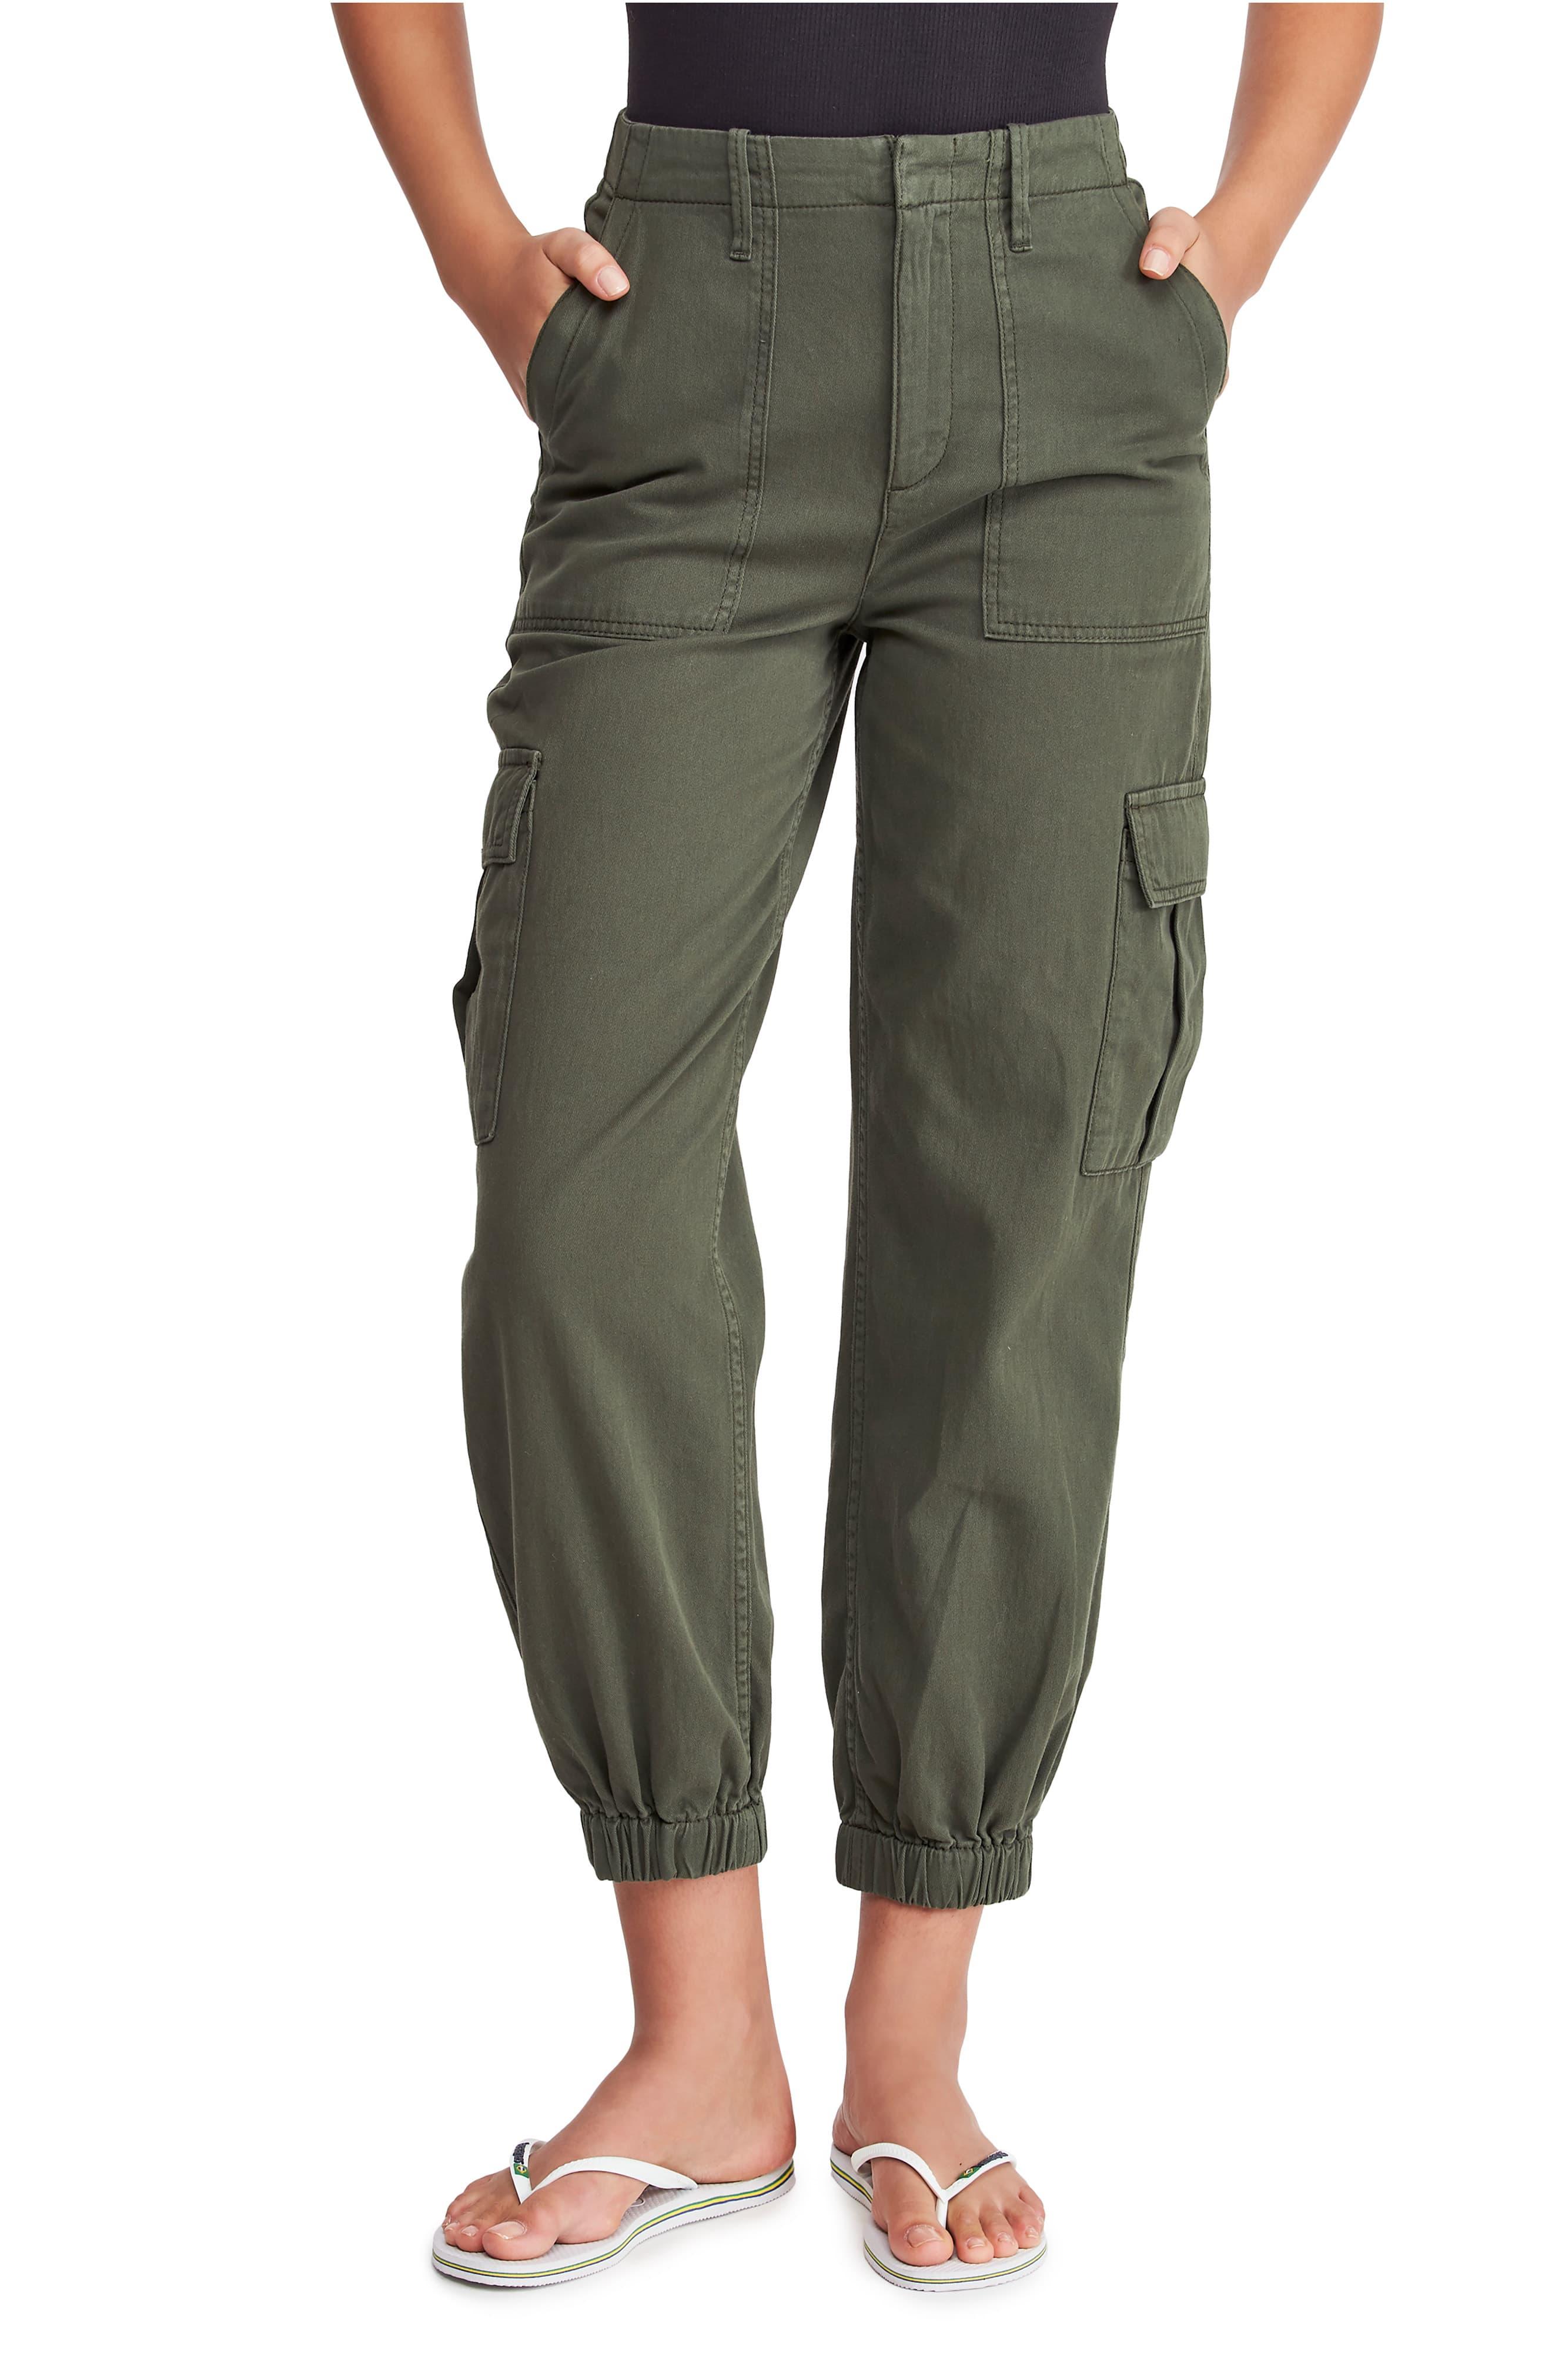 BDG Cotton Urban Outfitters Twill Cargo Trousers in Khaki (Green) - Lyst